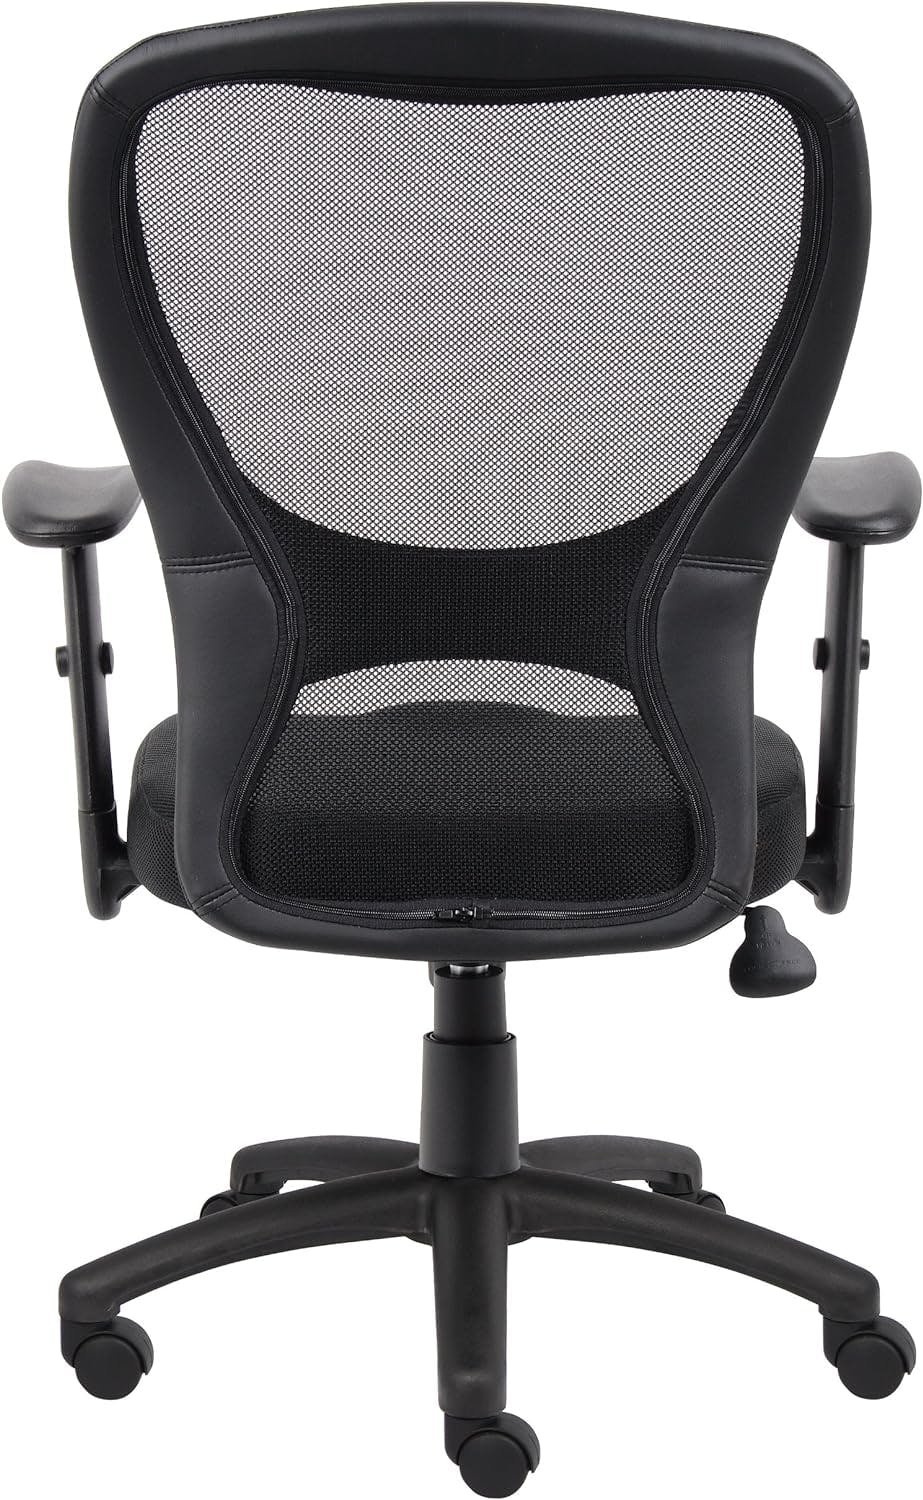 Adjustable Black Mesh Task Chair with Swivel and Tilt Control